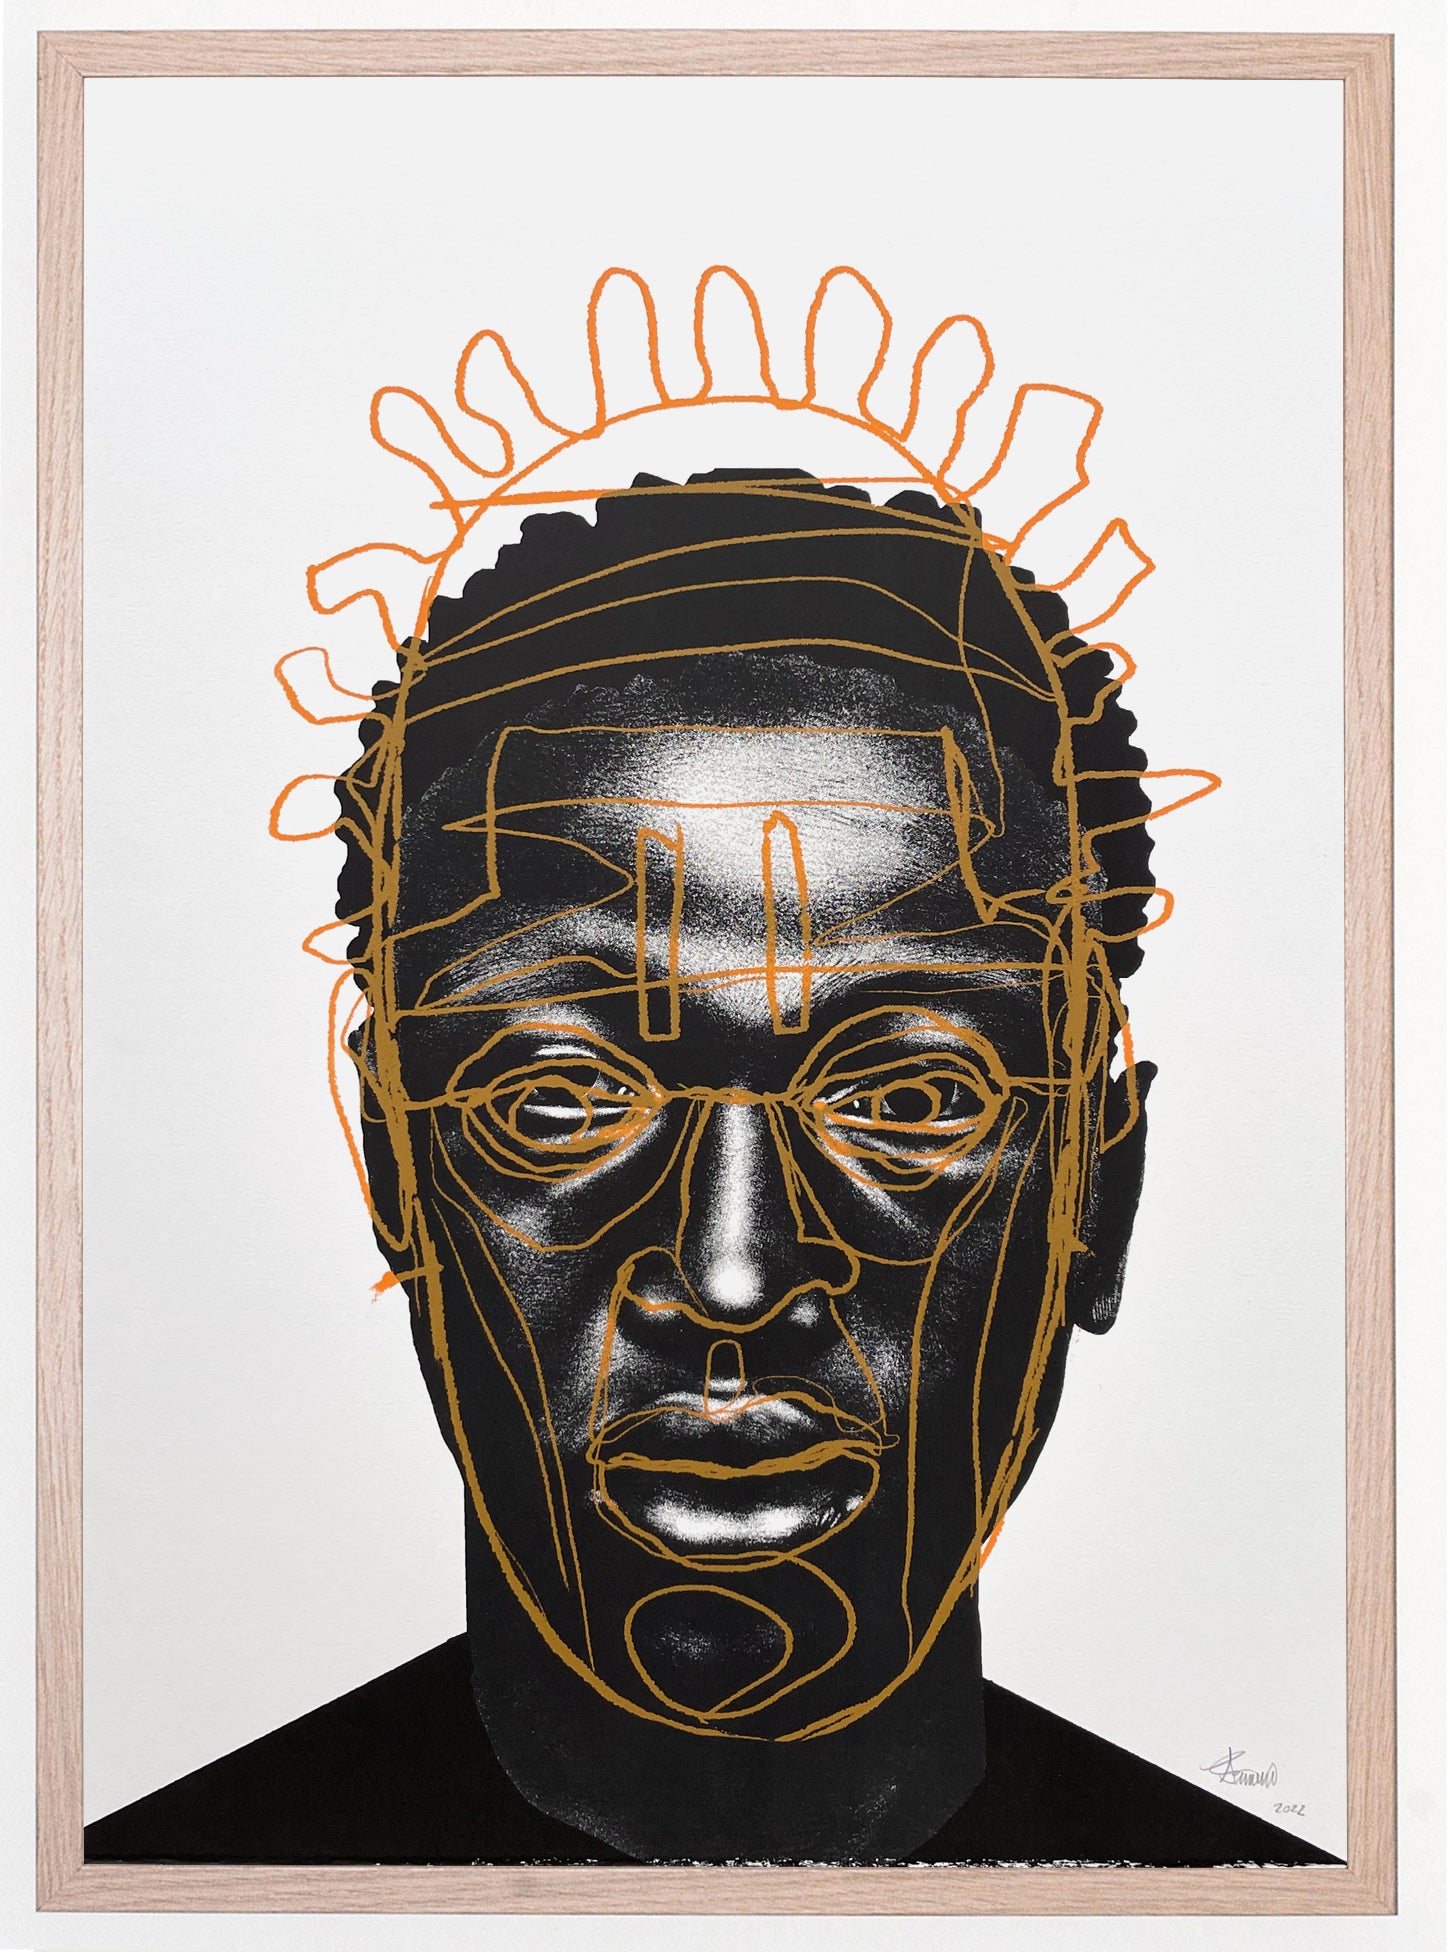 Limited edition print by Seth Pimentel for The Jaunt of a portrait of a man in black and white with abstract orange line work over his face  